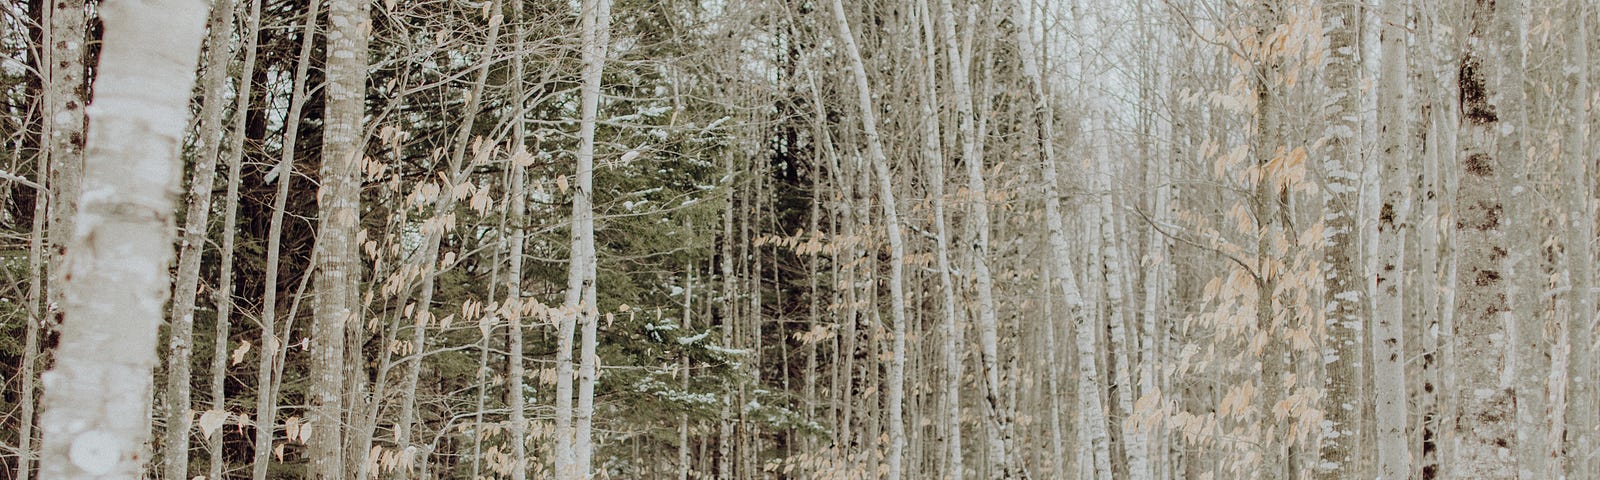 Woman alone in snow-covered woods